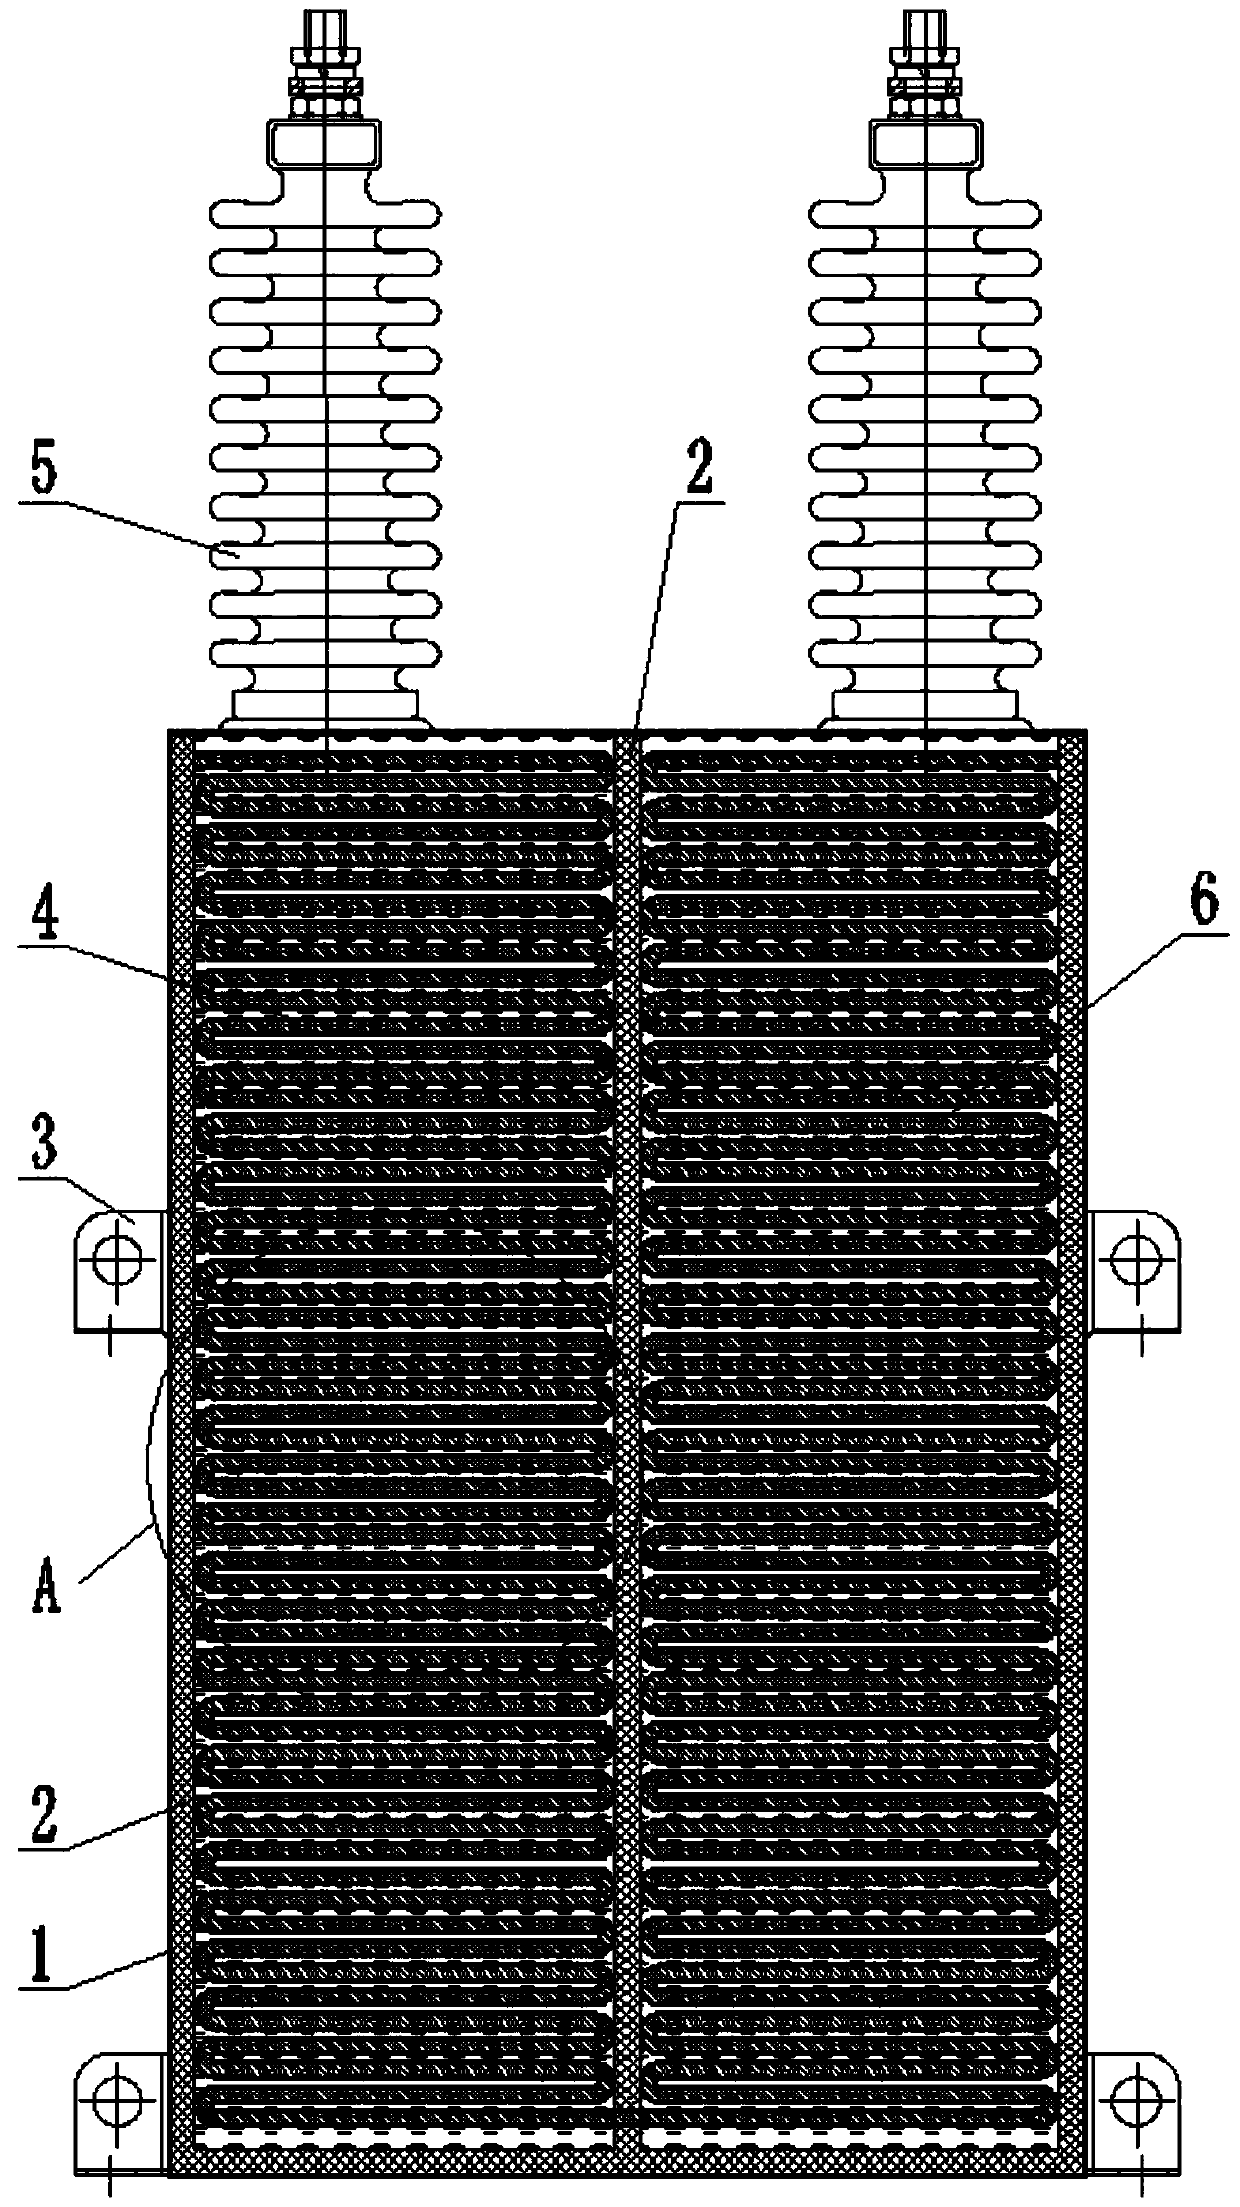 Oil-immersed high-power non-inductive resistor